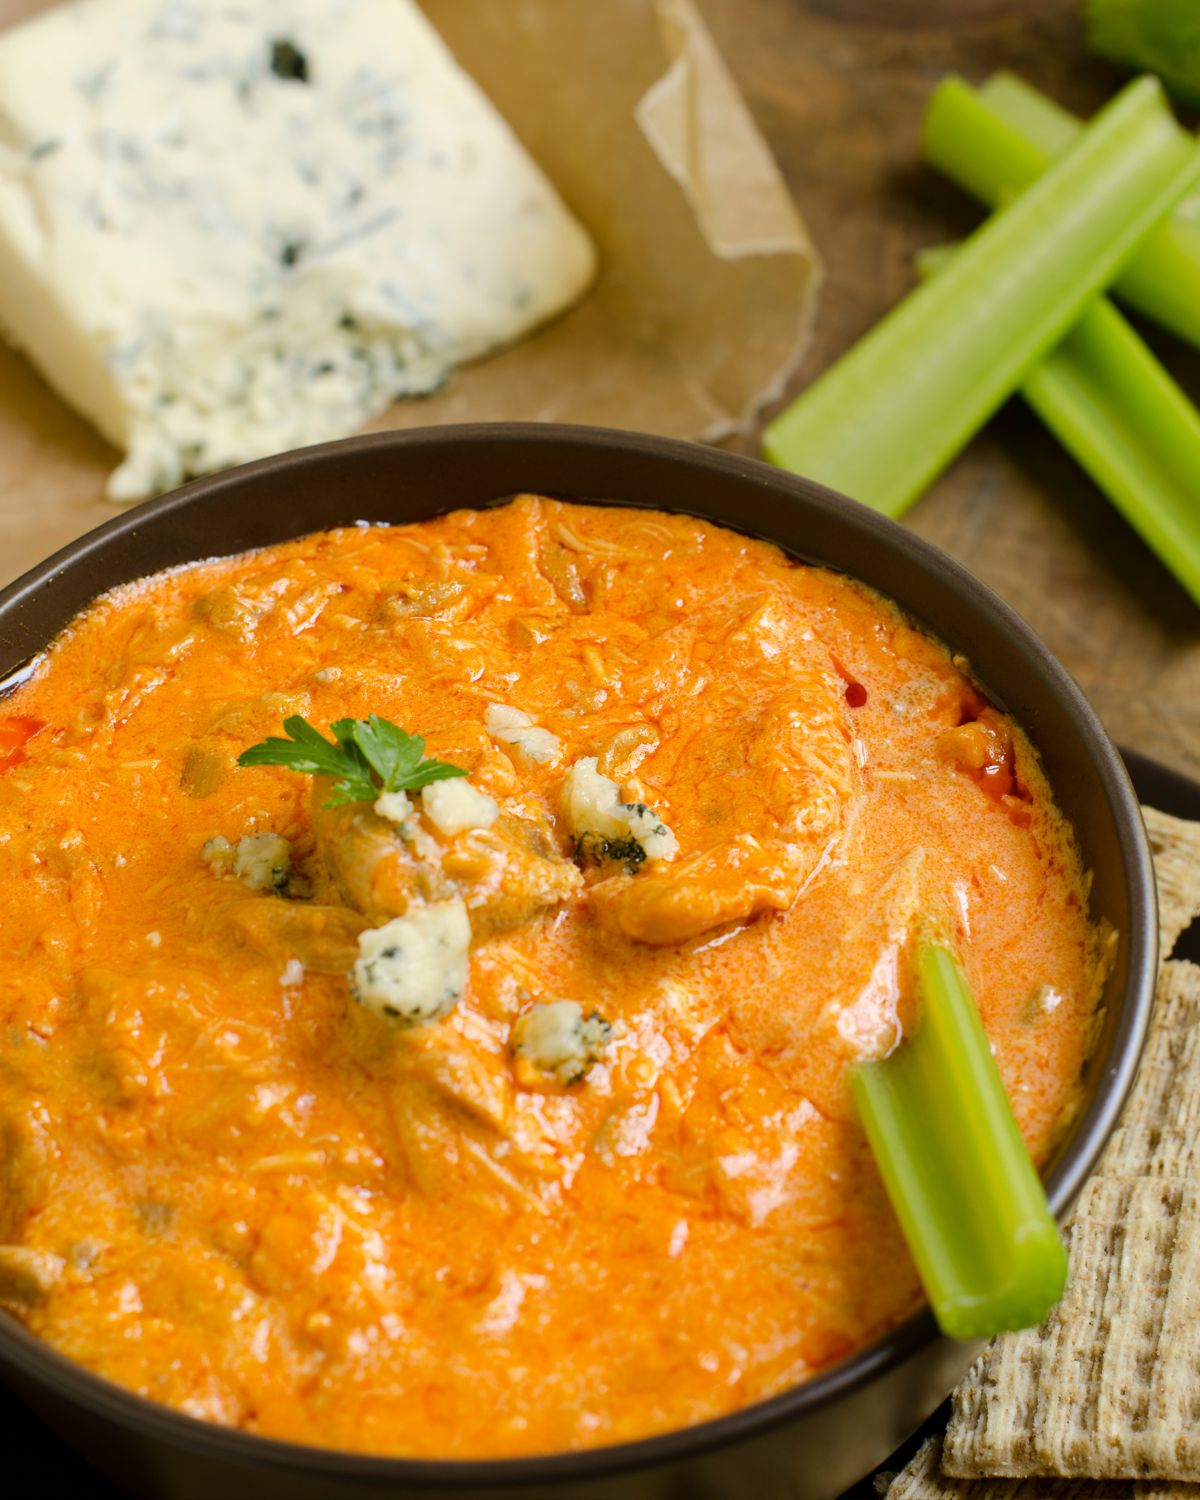 Healthy Buffalo Chicken Dip with celery in the dip.